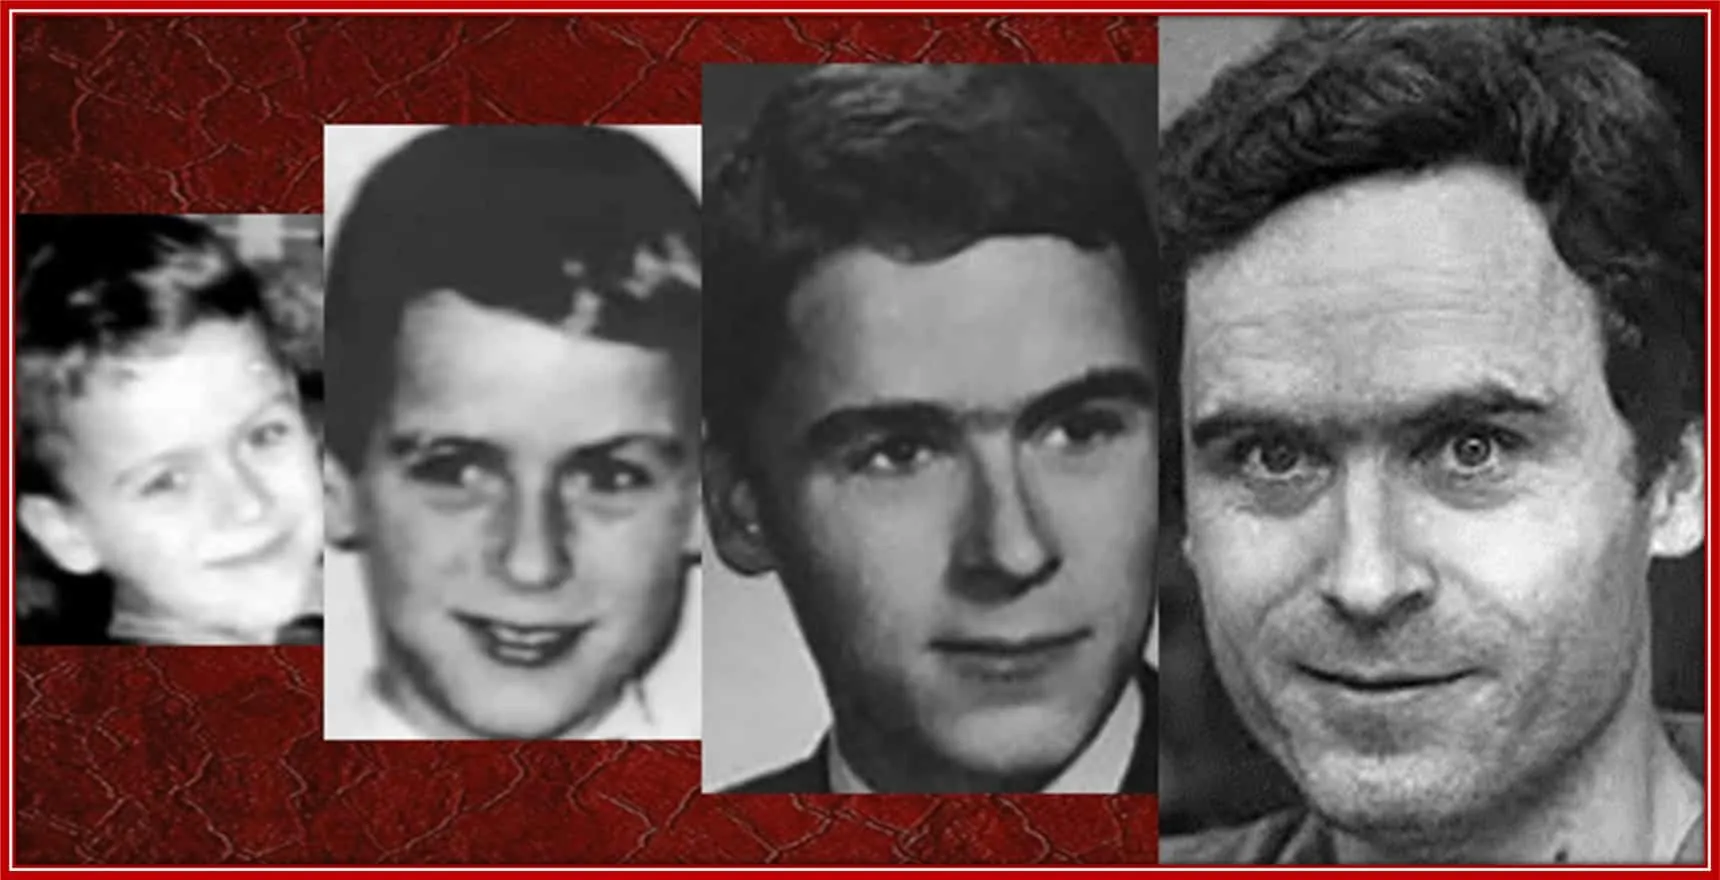 Ted Bundy Biography - Behold his Life story from cradle until his rise to fame.